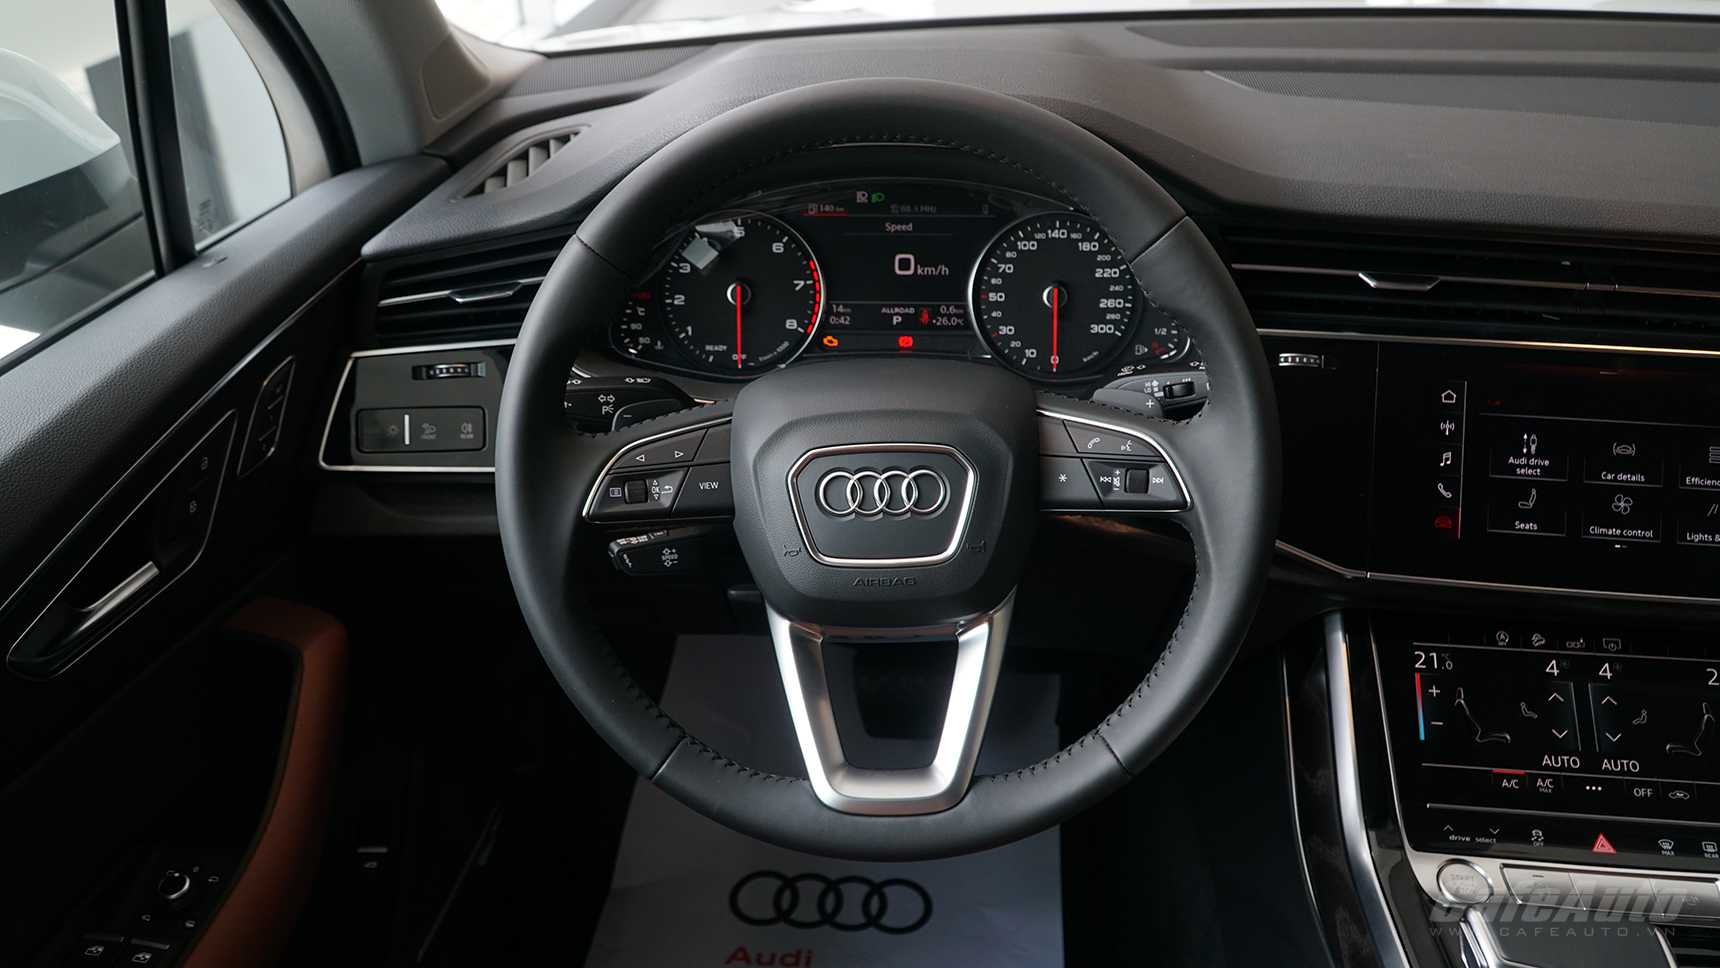 can-canh-audi-q7-the-he-moi